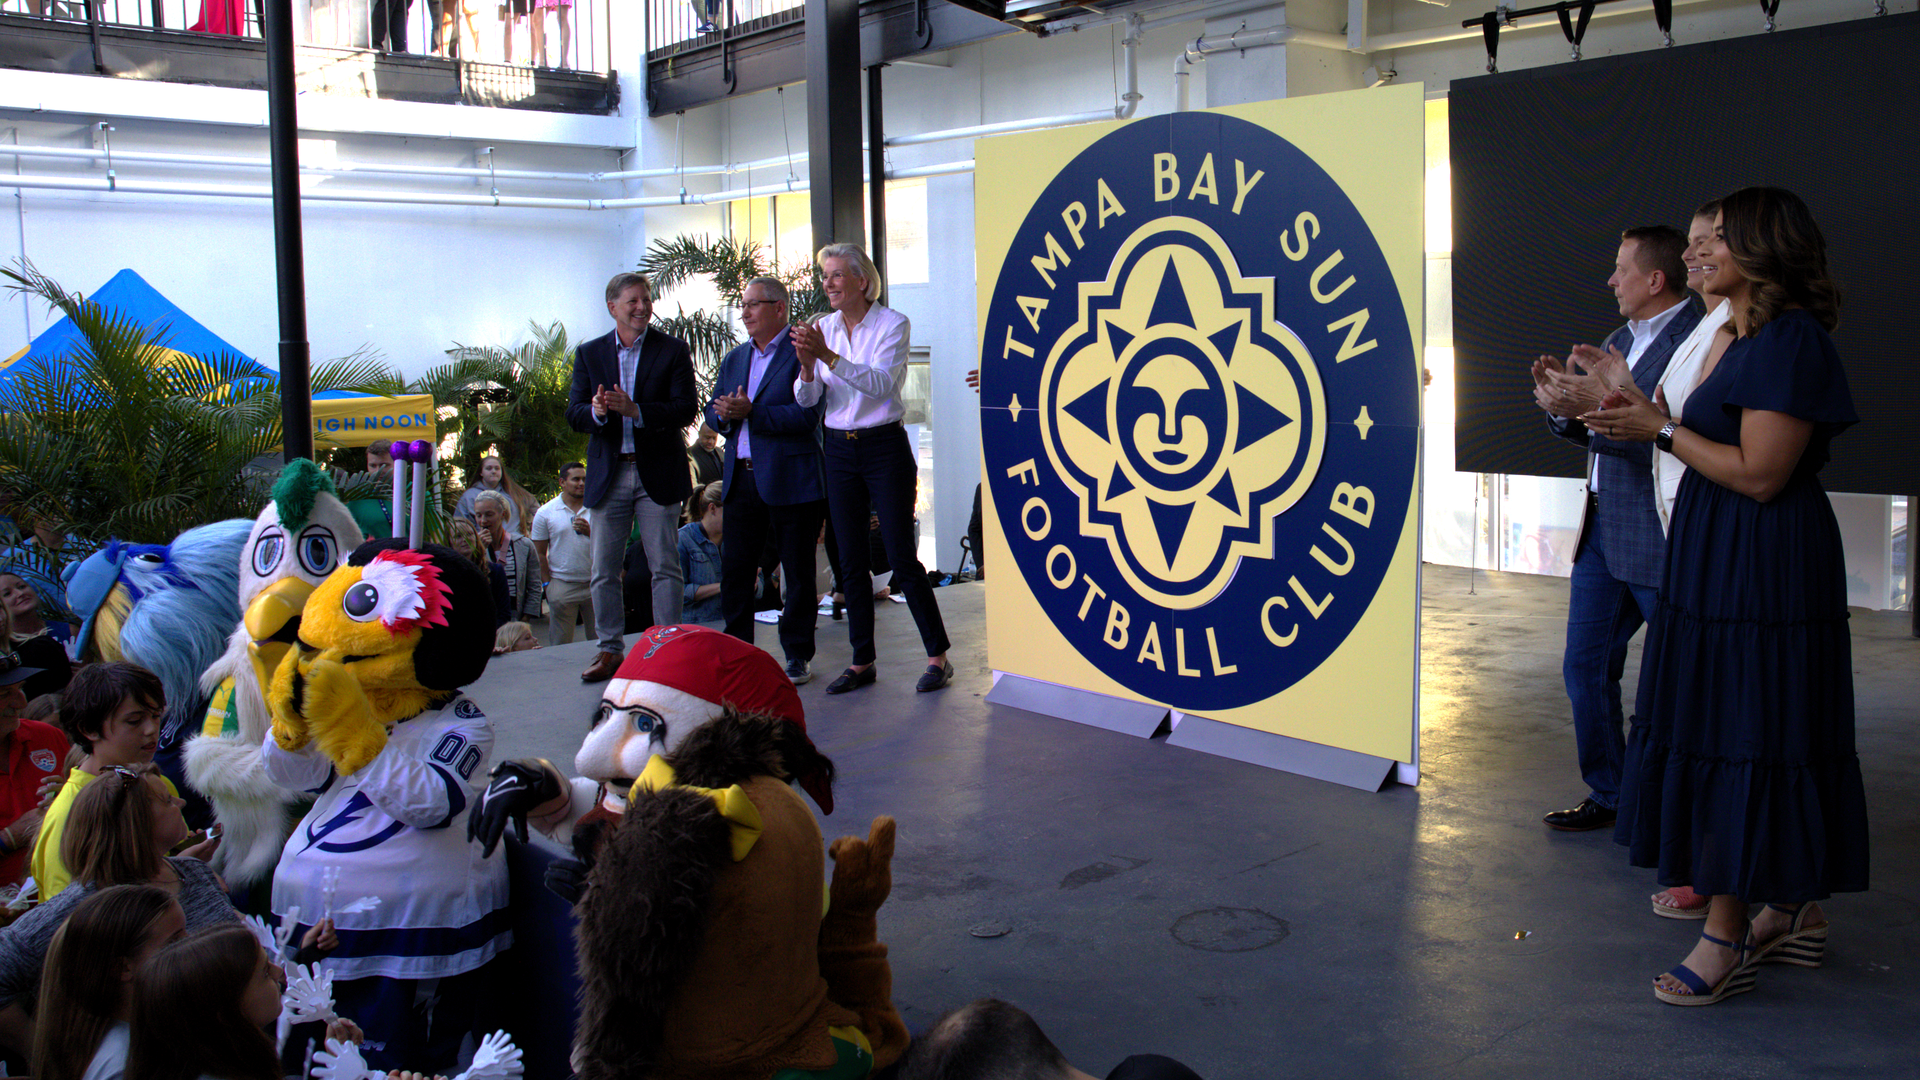 A display board with a blue-and-yellow design of a sun circled by the words "Tampa Bay Sun Football Club." The sign is flaked on either side by three people, all smiling and clapping.